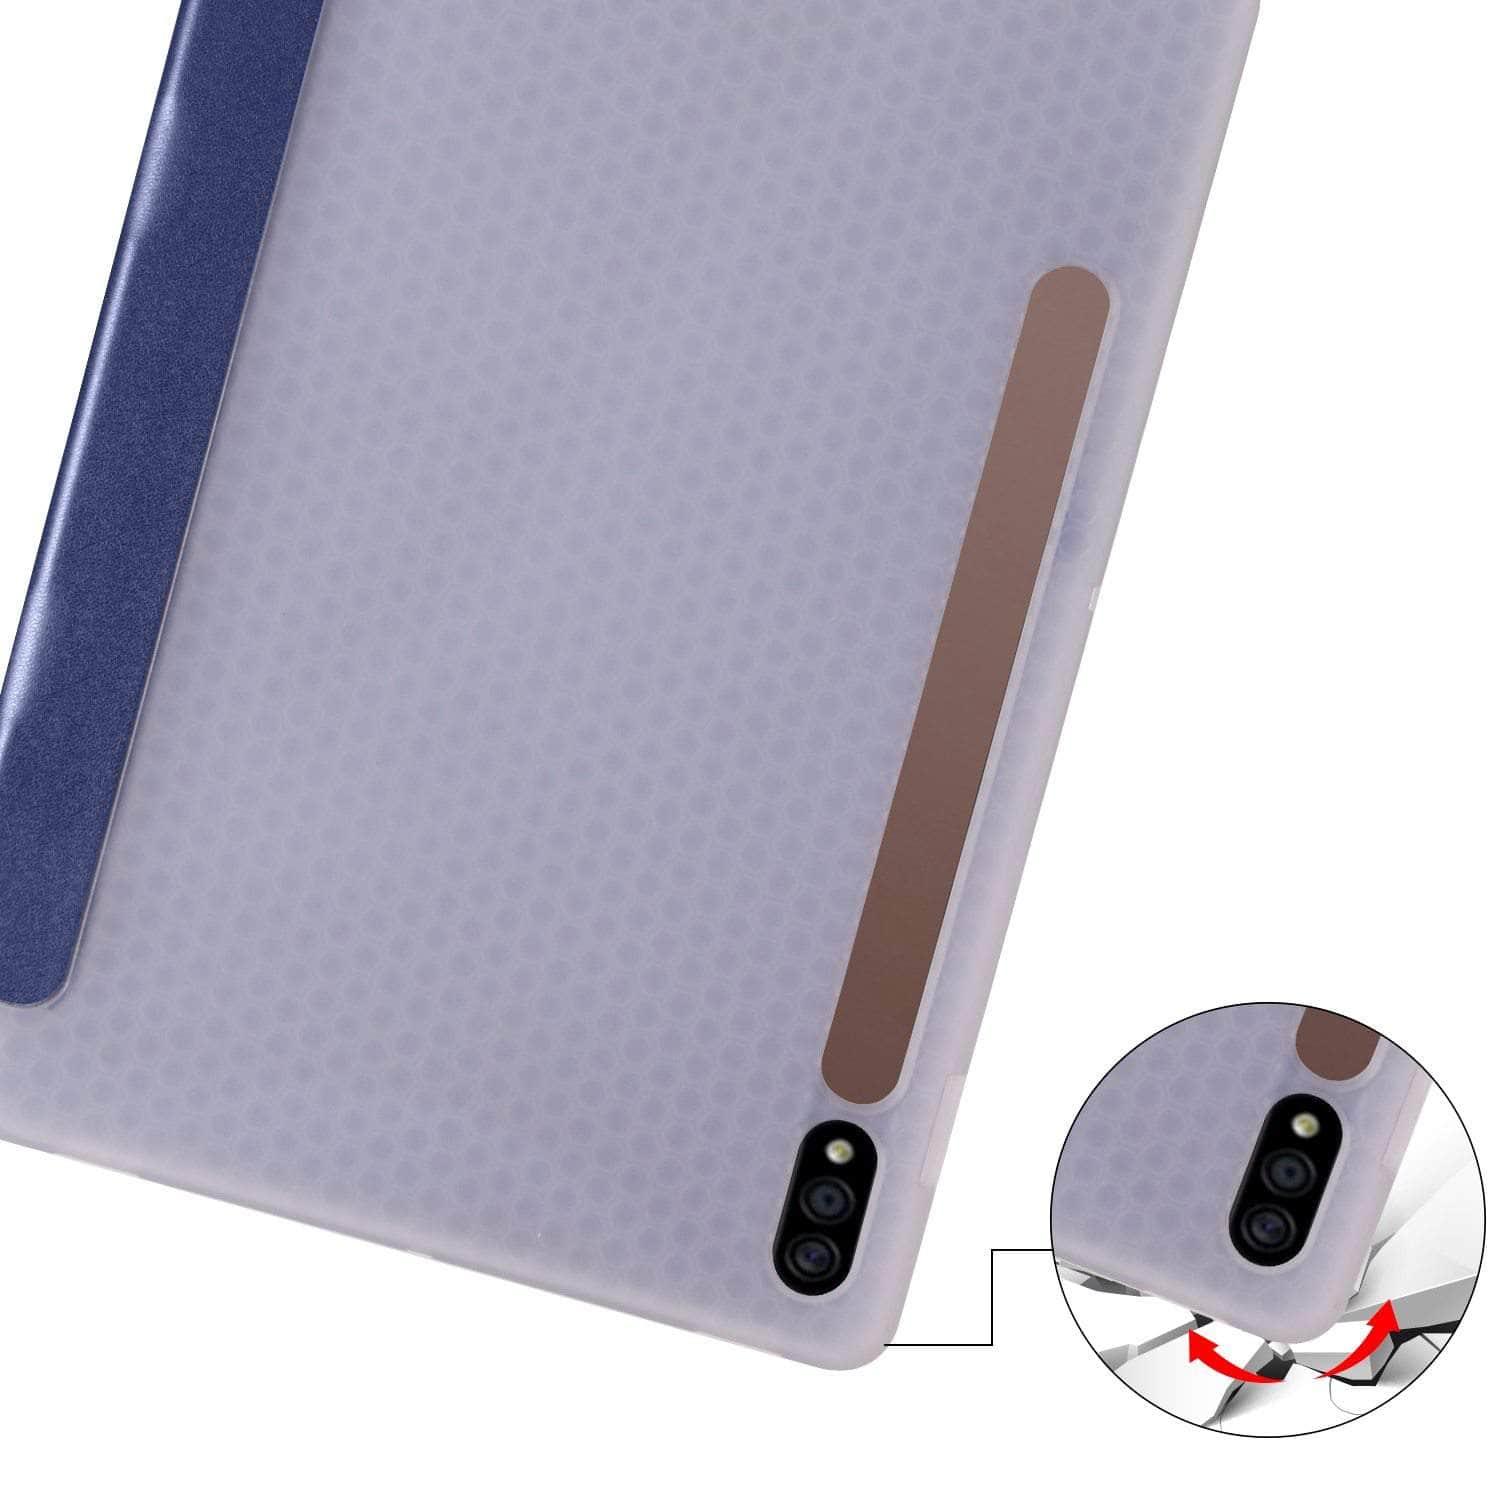 Pencil Holder Galaxy Tab S7 T870 T875 Protect Cover - CaseBuddy